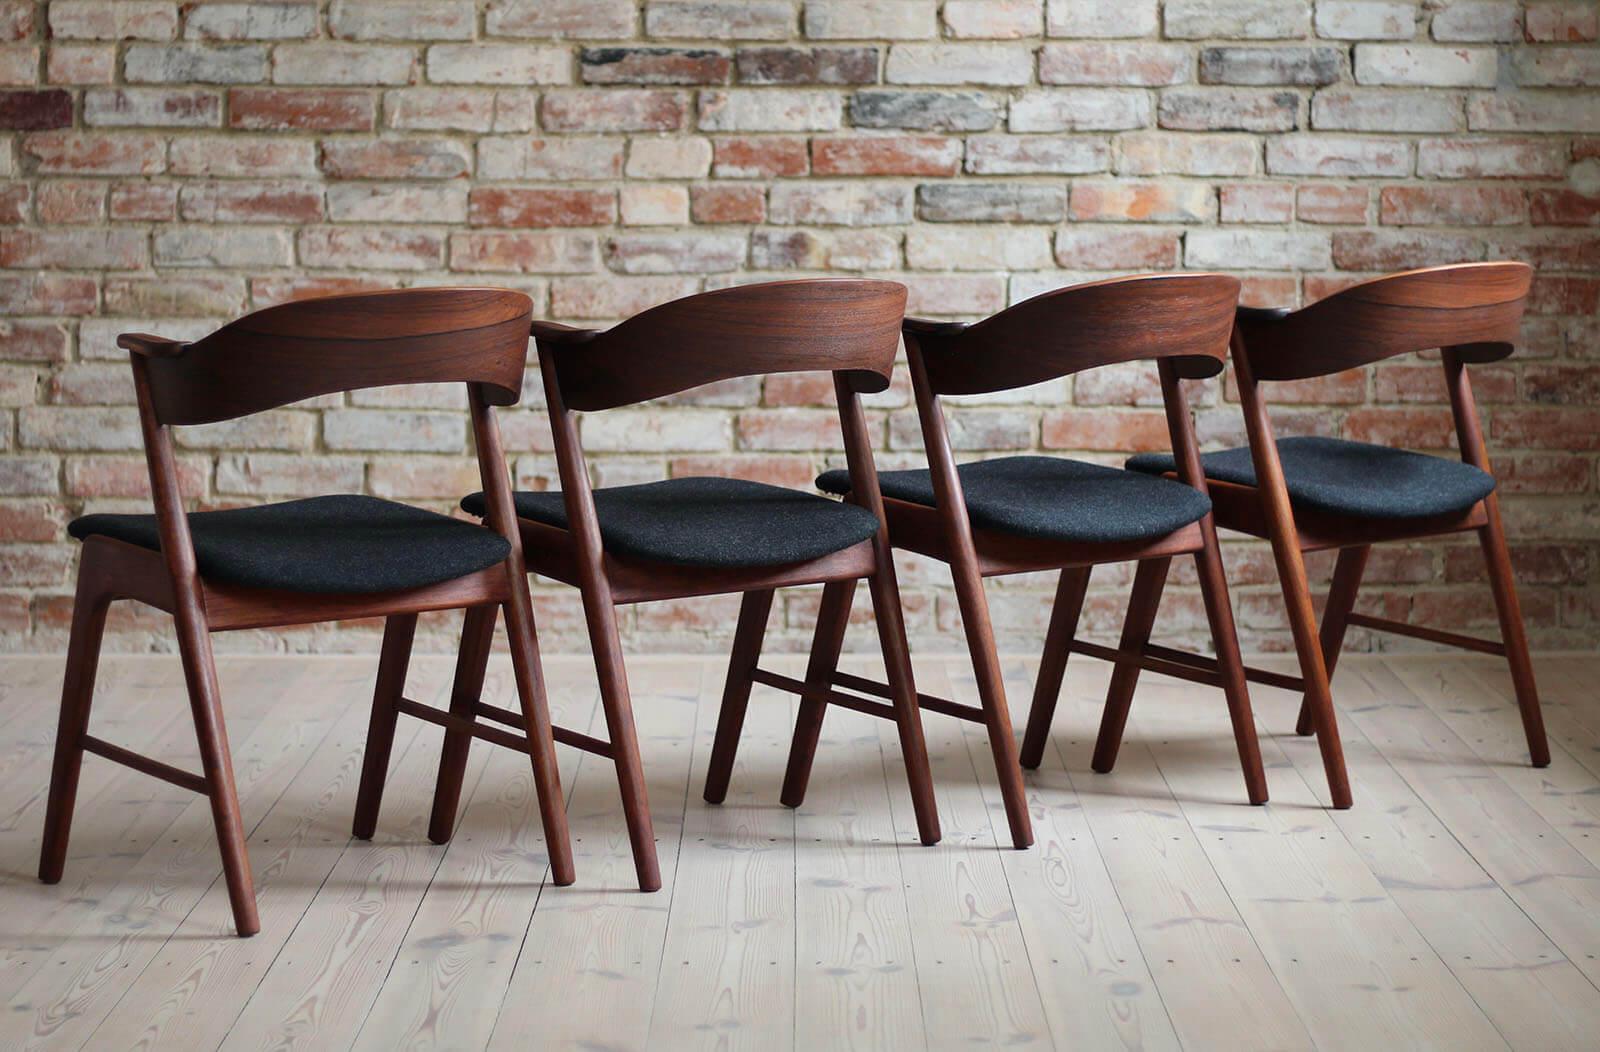 Scandinavian Modern Set of 4 Dining Chairs in Kai Kristiansen Style, 1960s, Fully Renovated